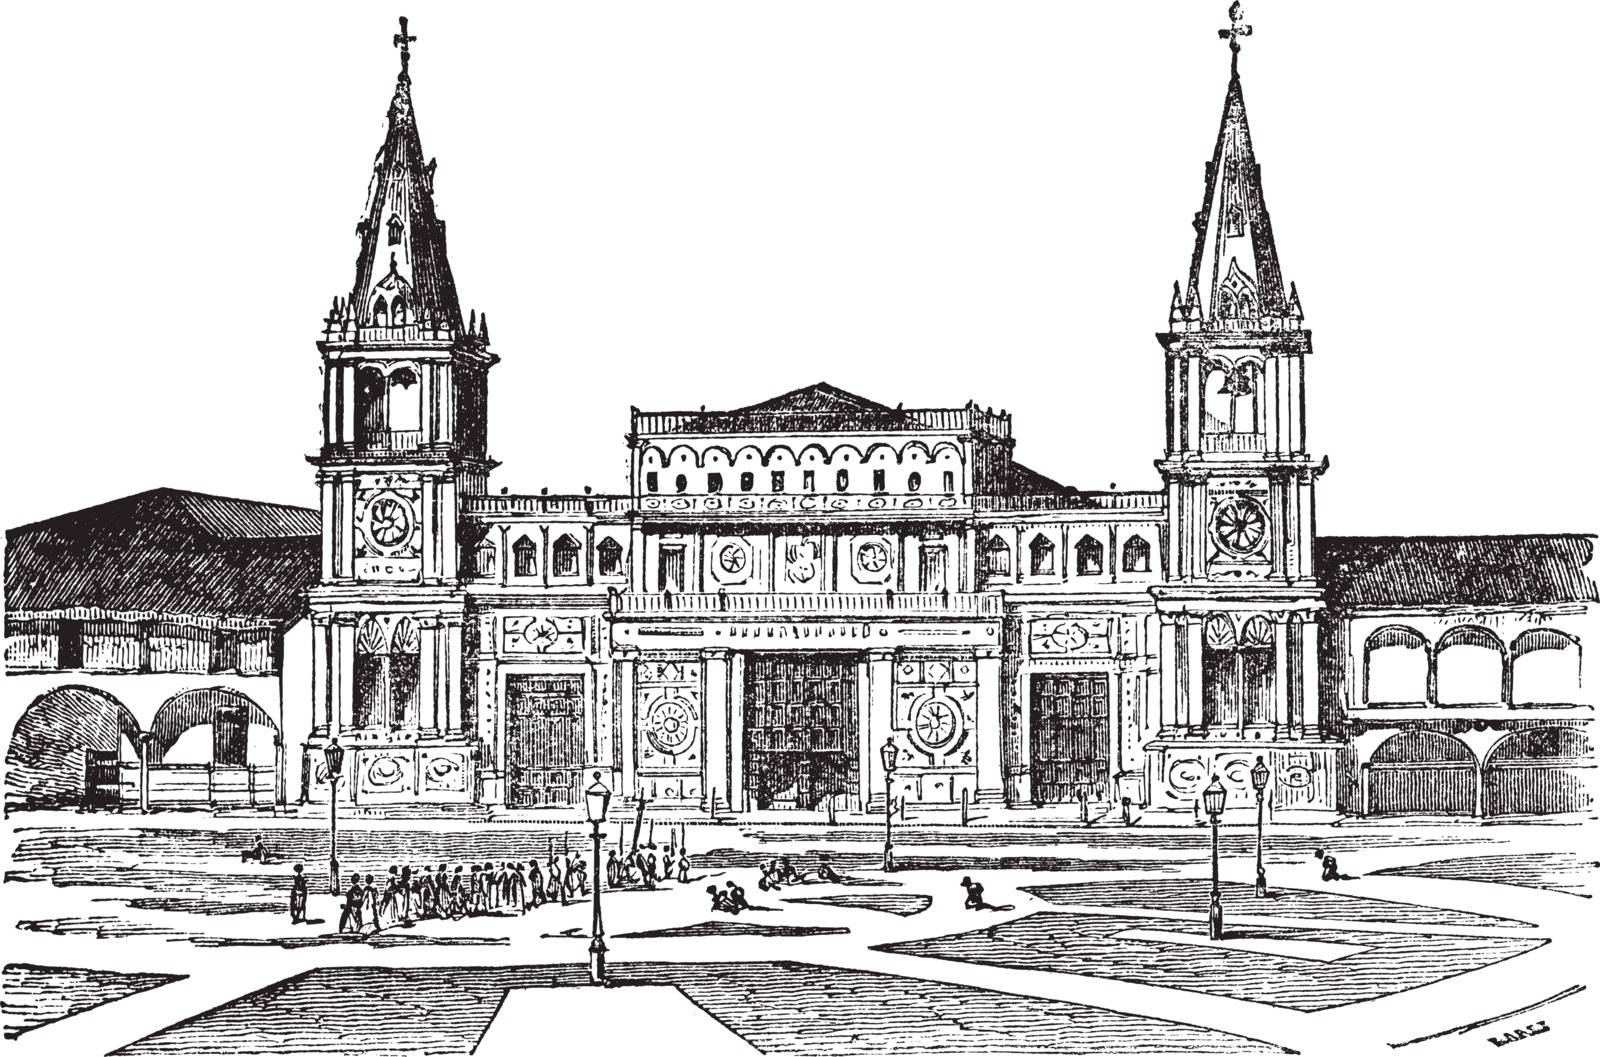 Cathedral of Guayaquil or Cathedral of Saint Peter[, Ecuador. Old engraved illustration of Cathedral of Guayaquil,1800s.